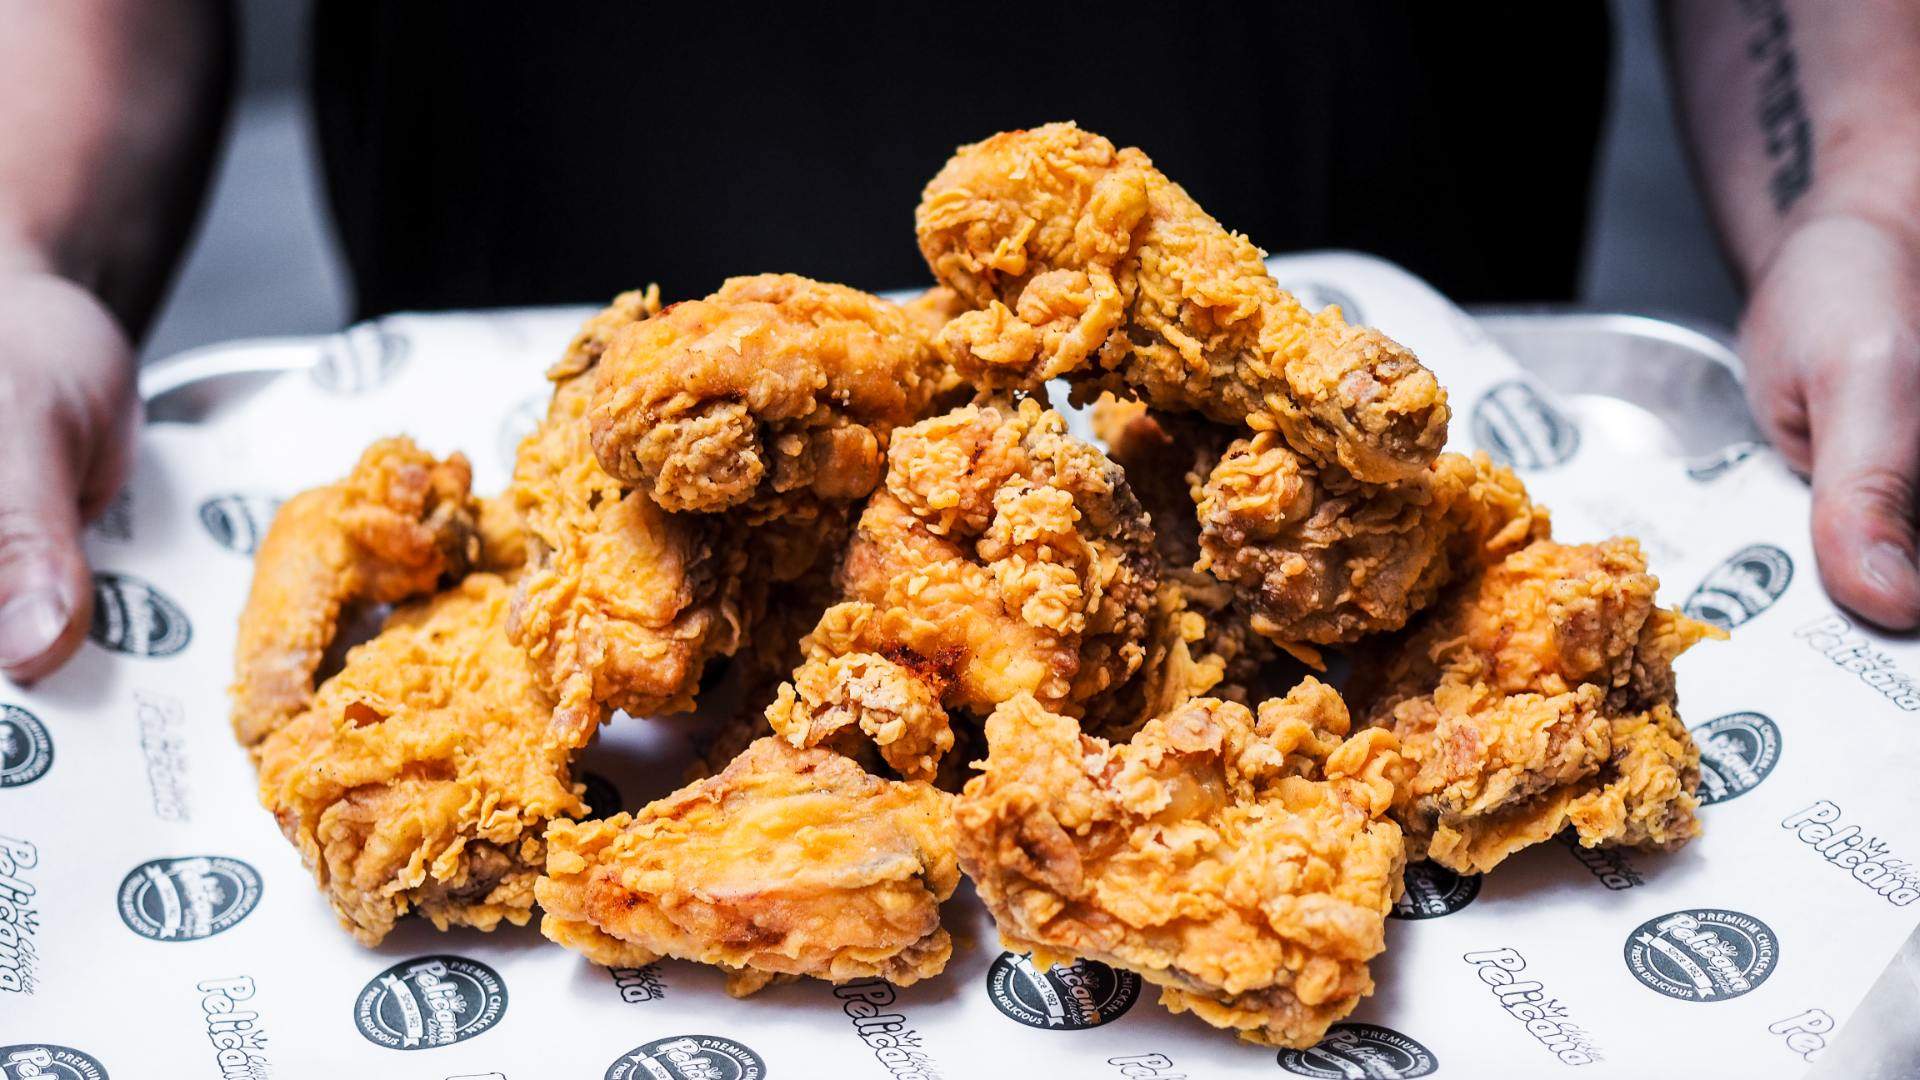 Where to Find the Best Fried Chicken in Melbourne for 2023